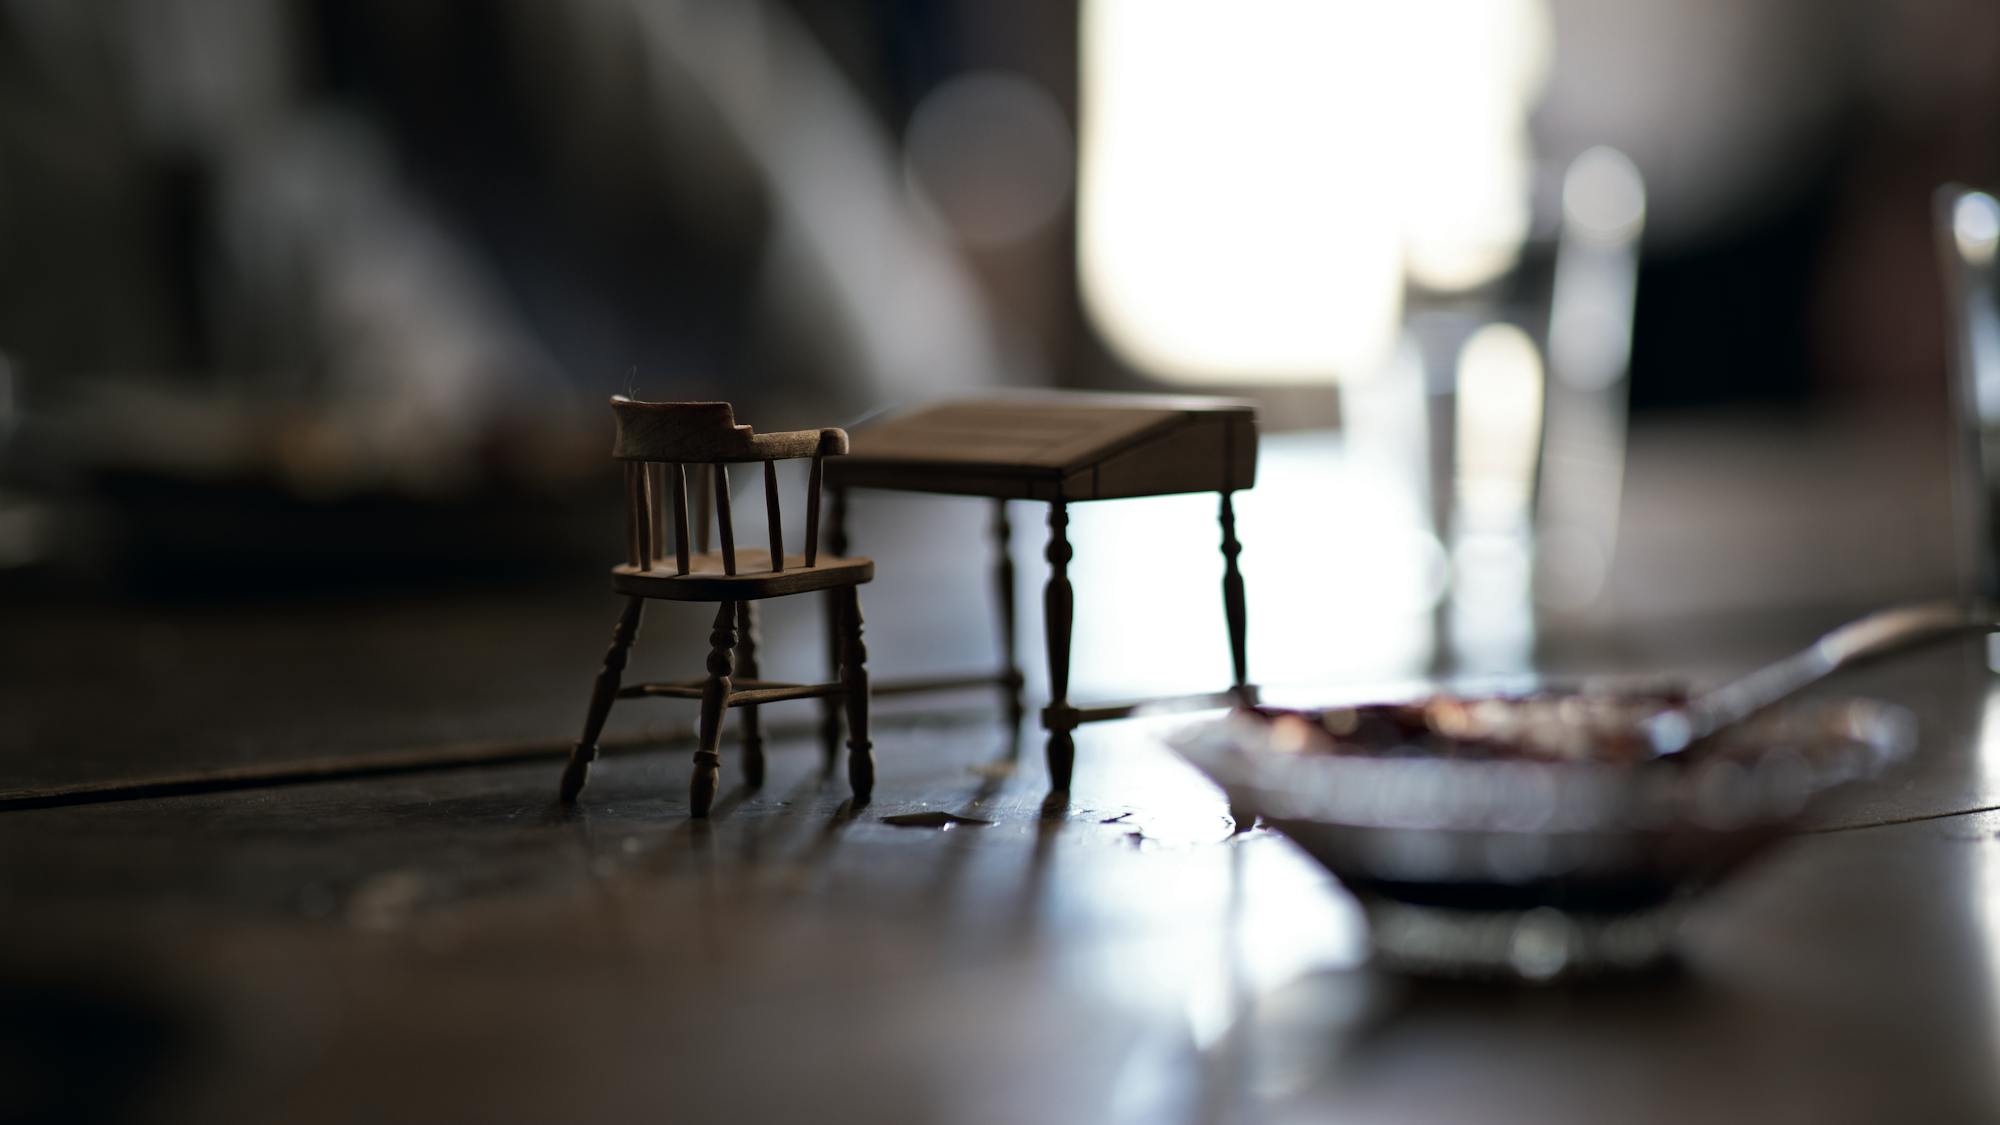 A miniature desk and chair sit on a wood table.